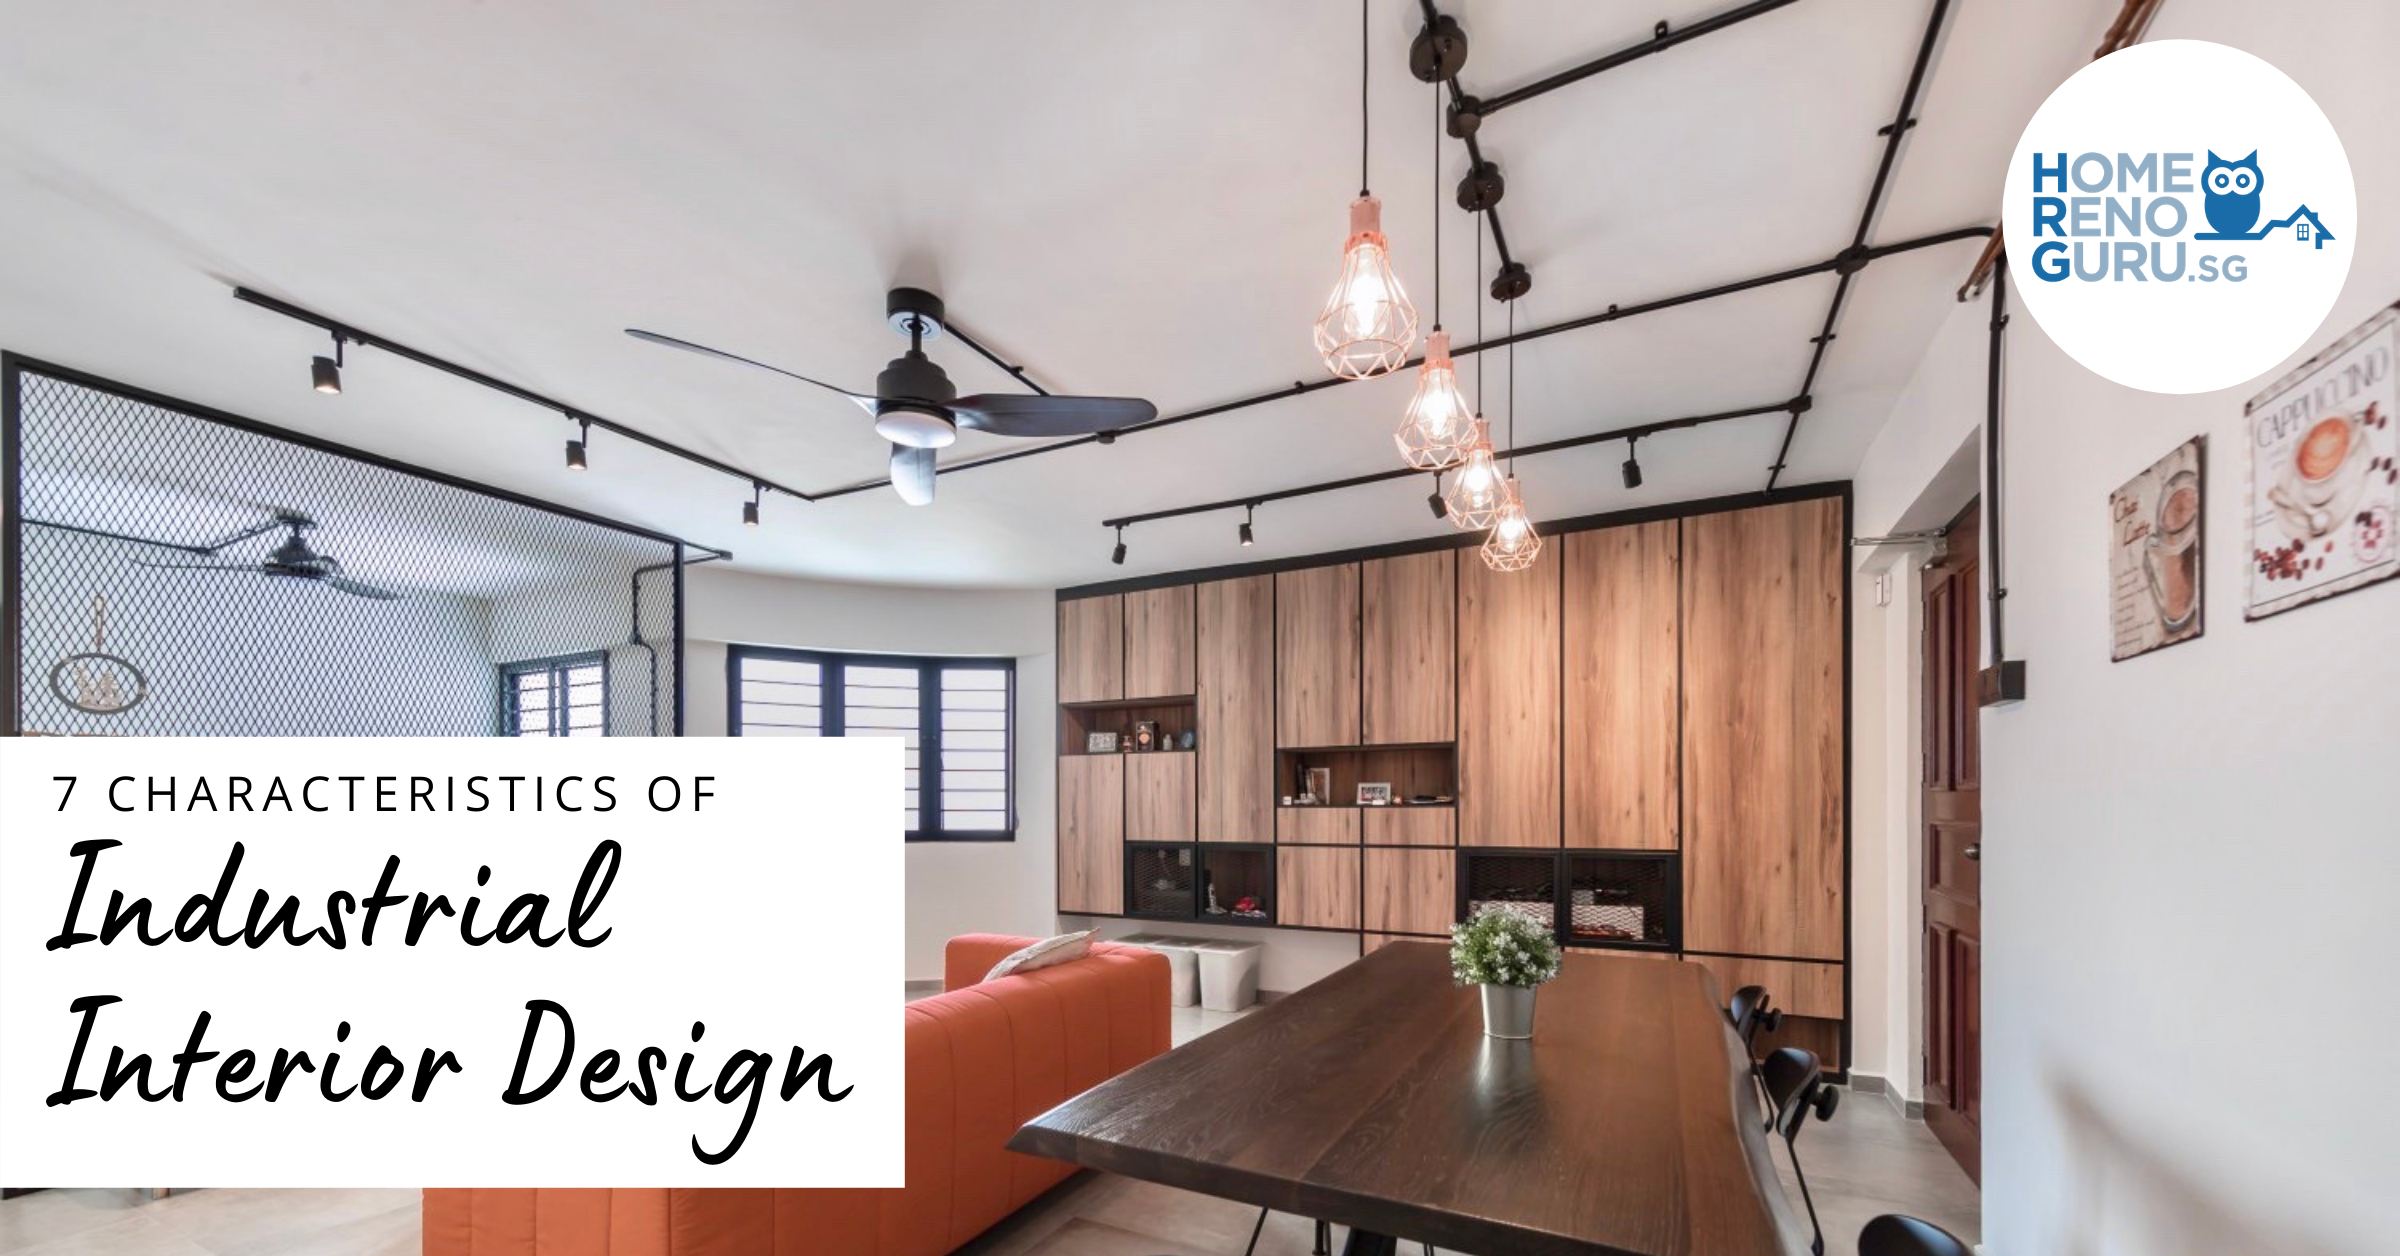 7 Characteristics Of Industrial Interior Design For Different Rooms In Your HDB